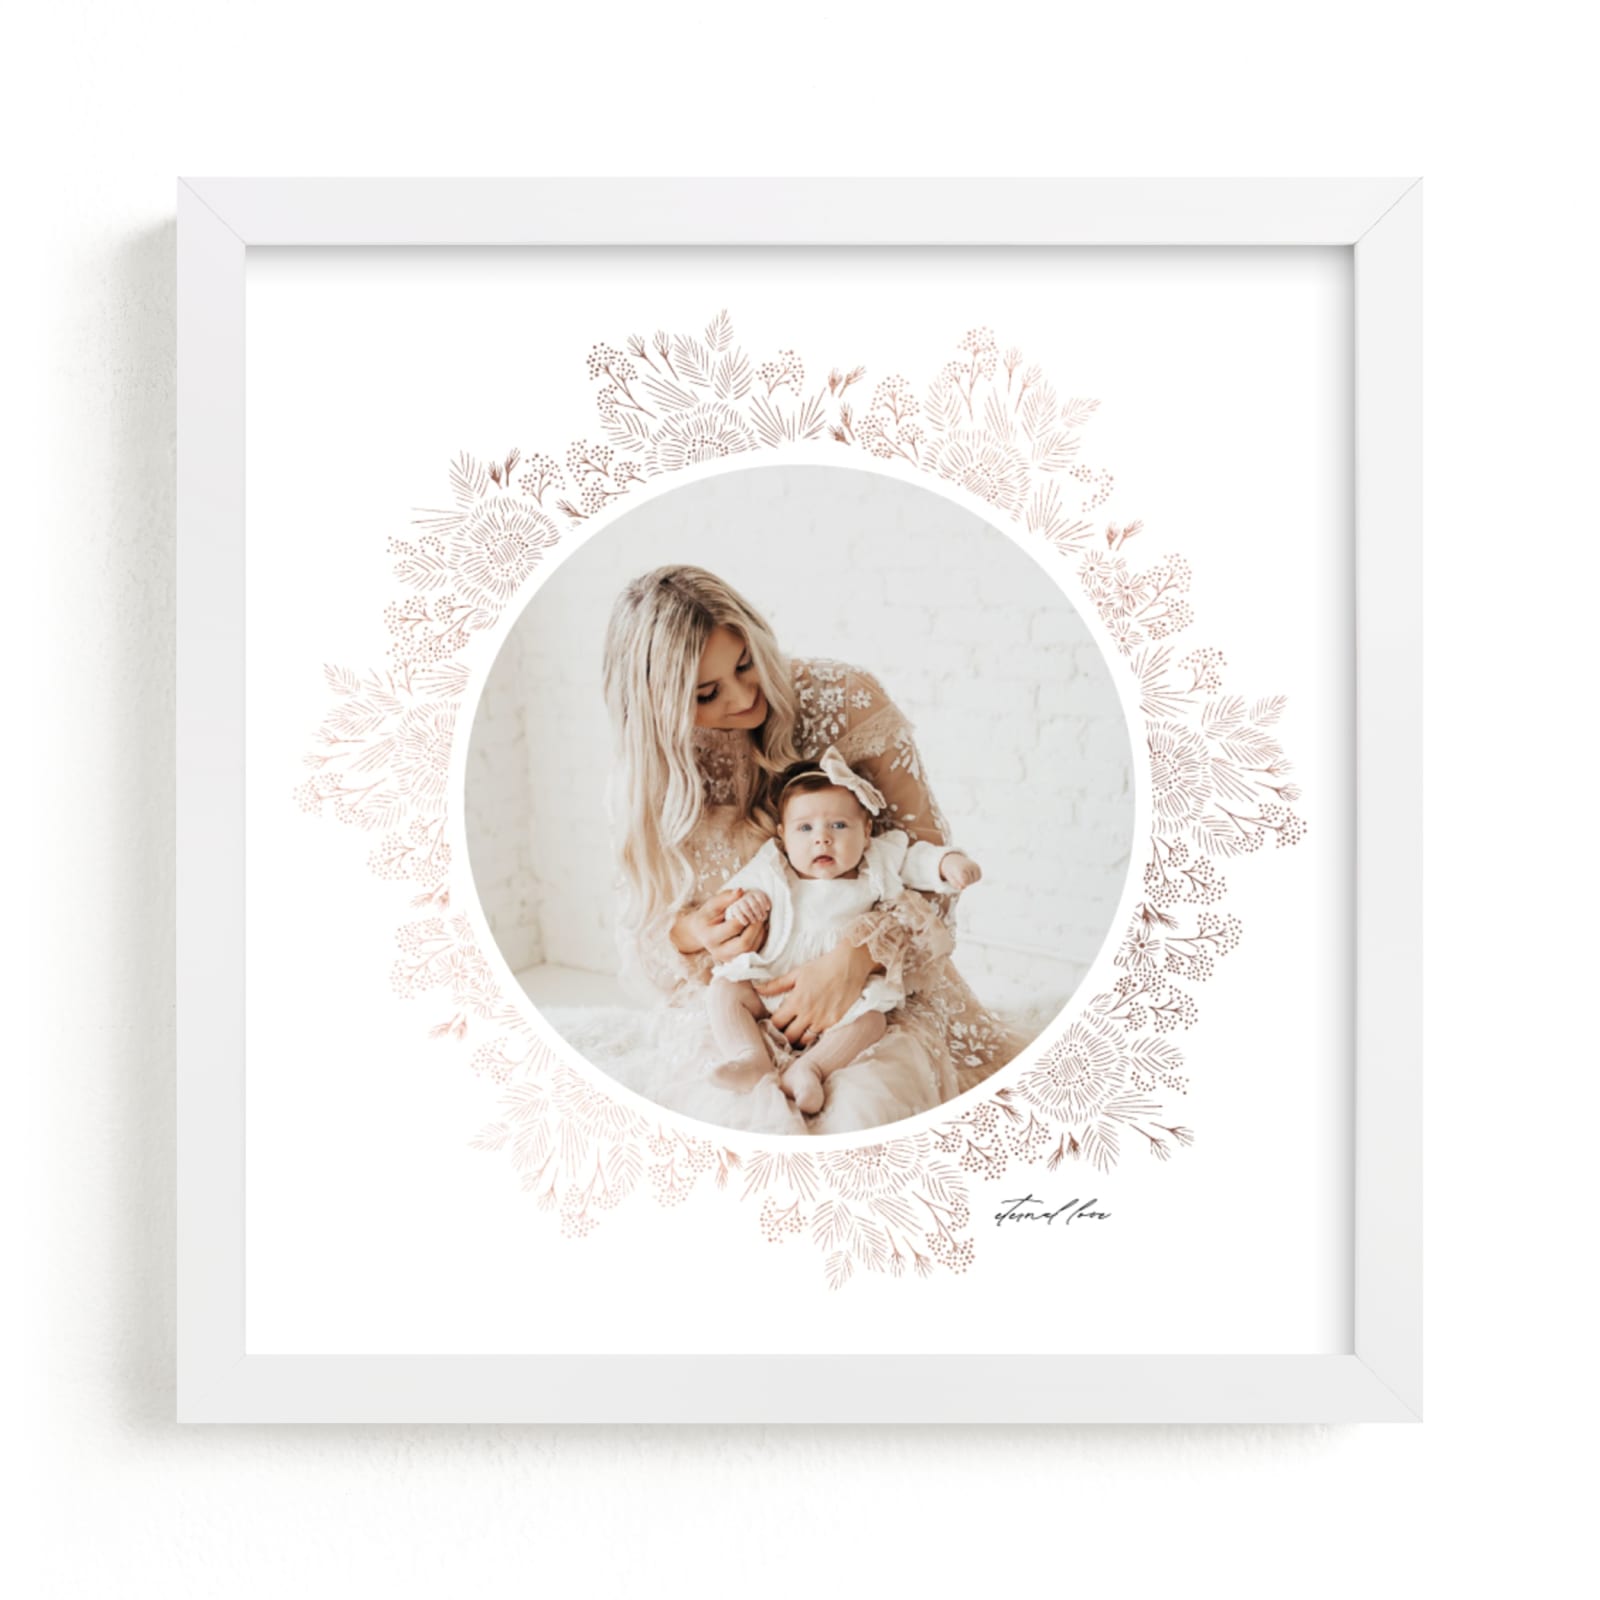 This is a rosegold foil stamped photo art by Tamara Hilje called Gilded Blooms.